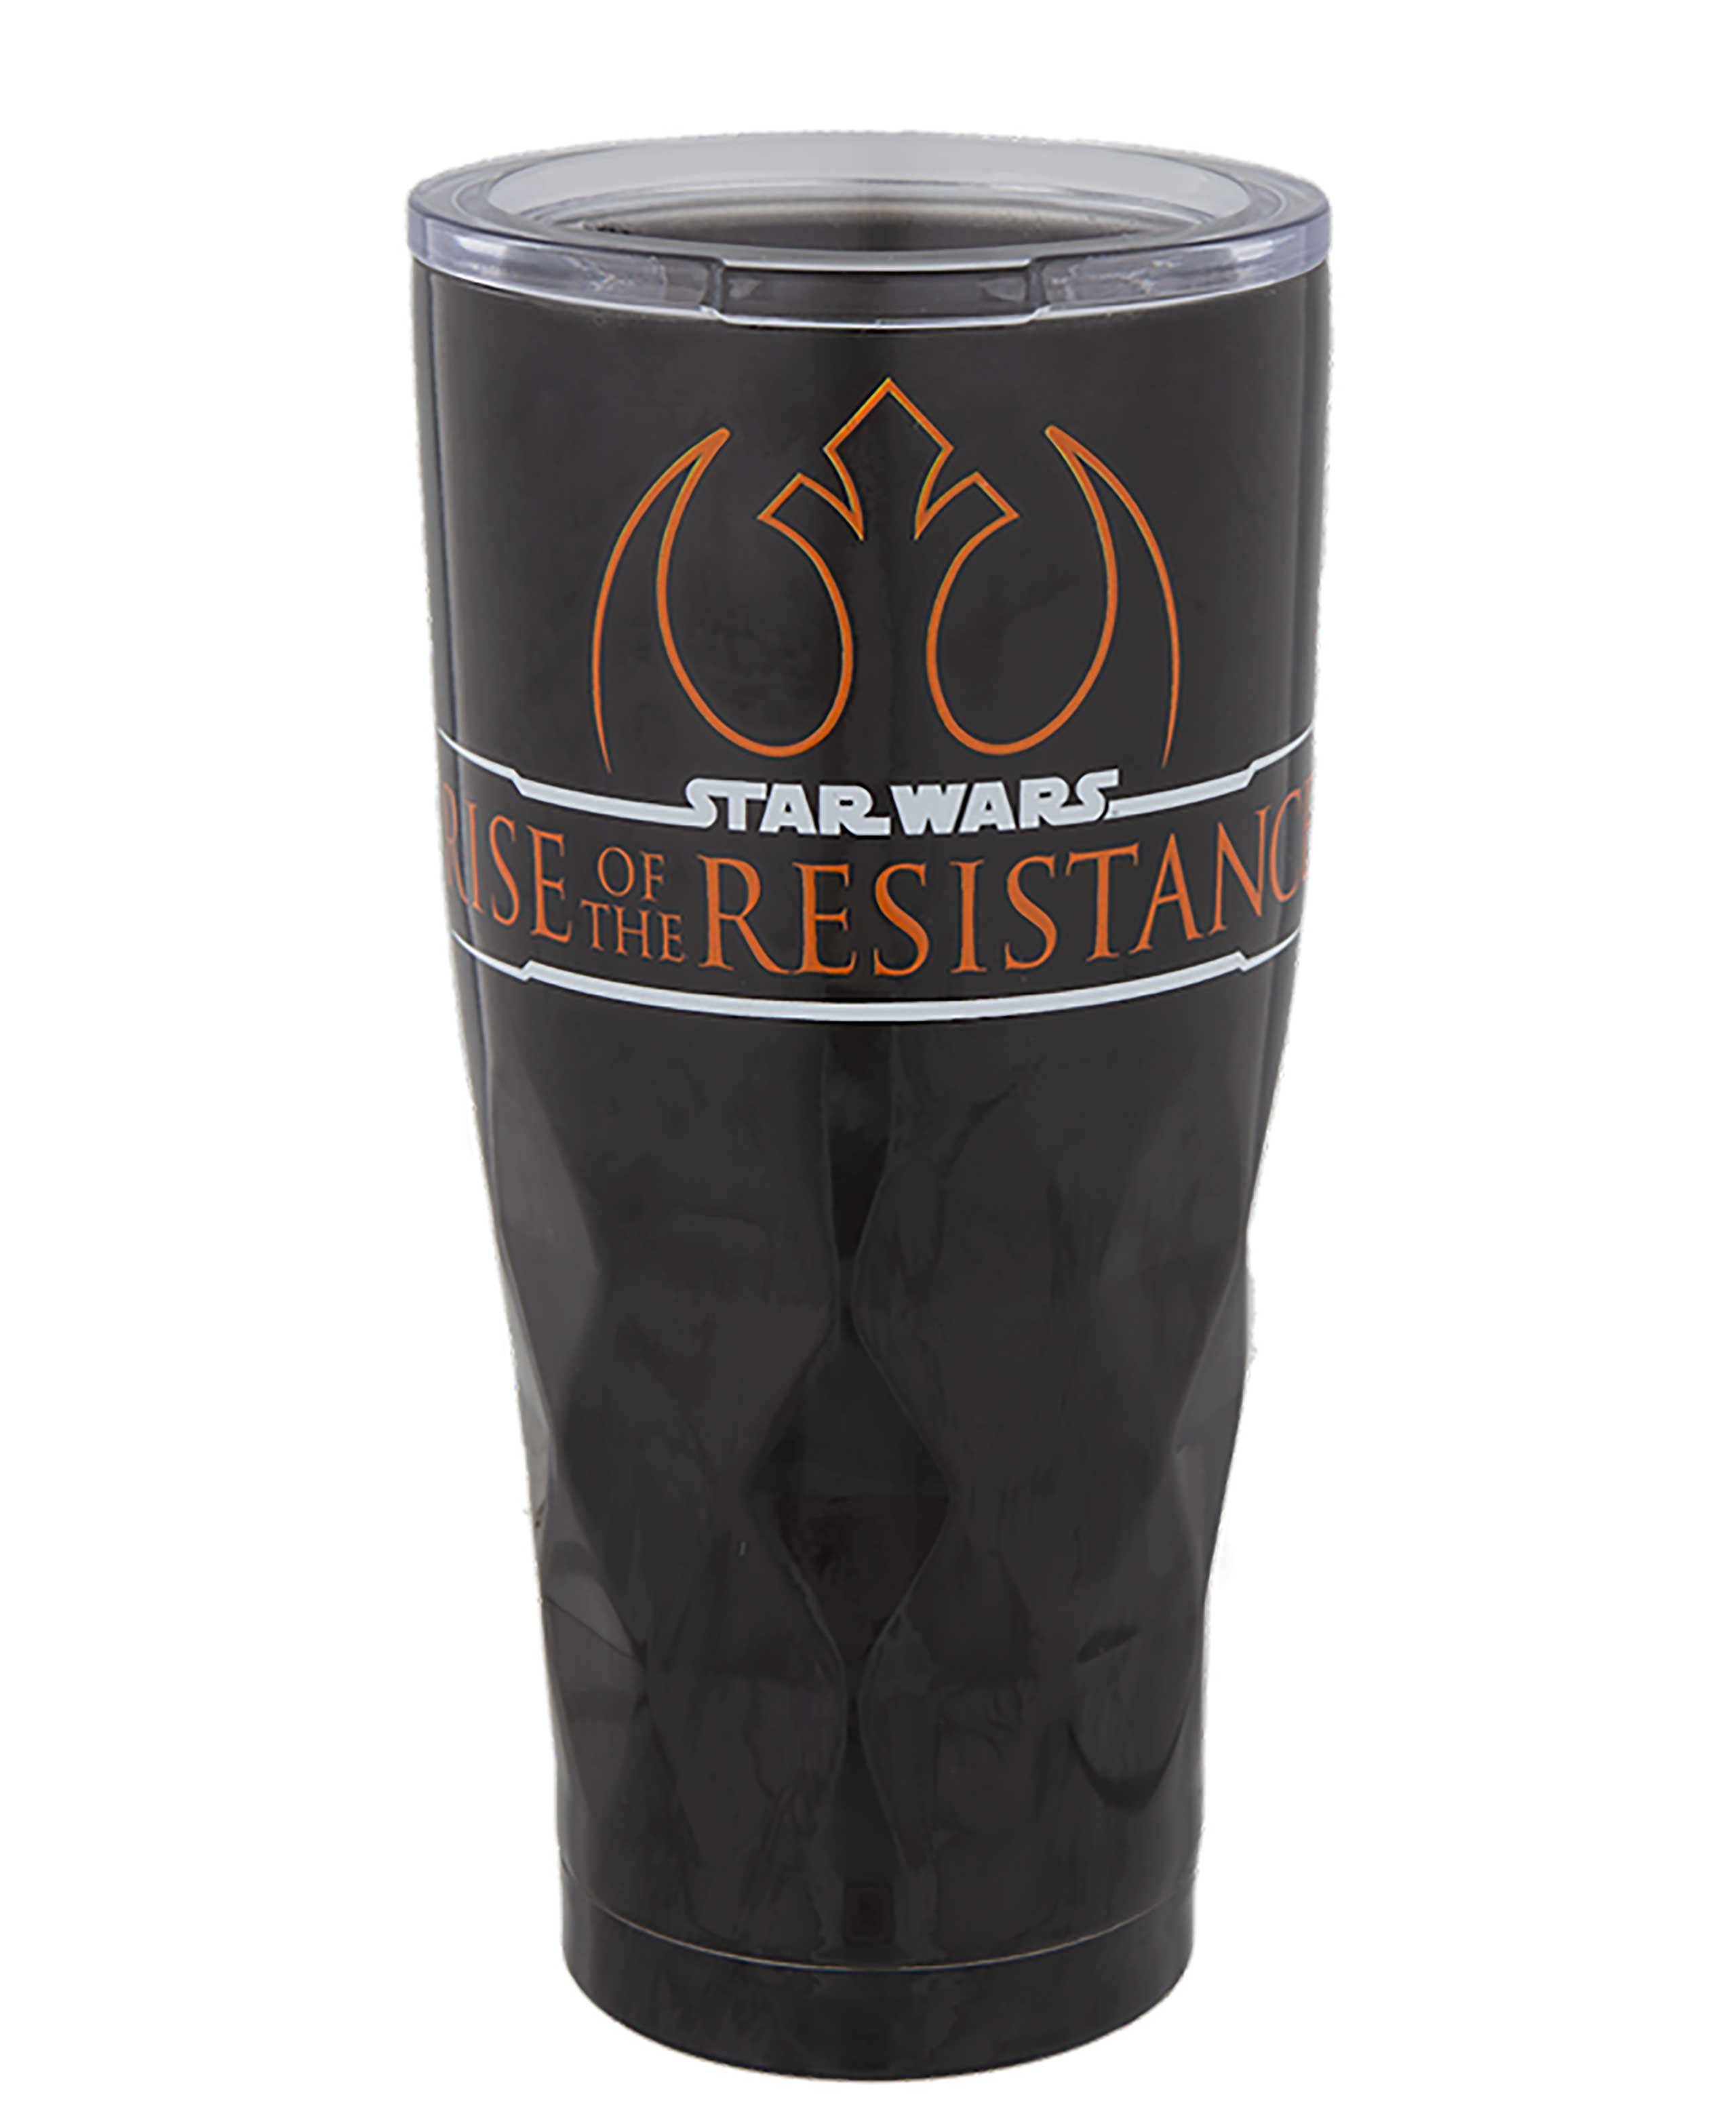 Star Wars Rise of the Resistance merchandise